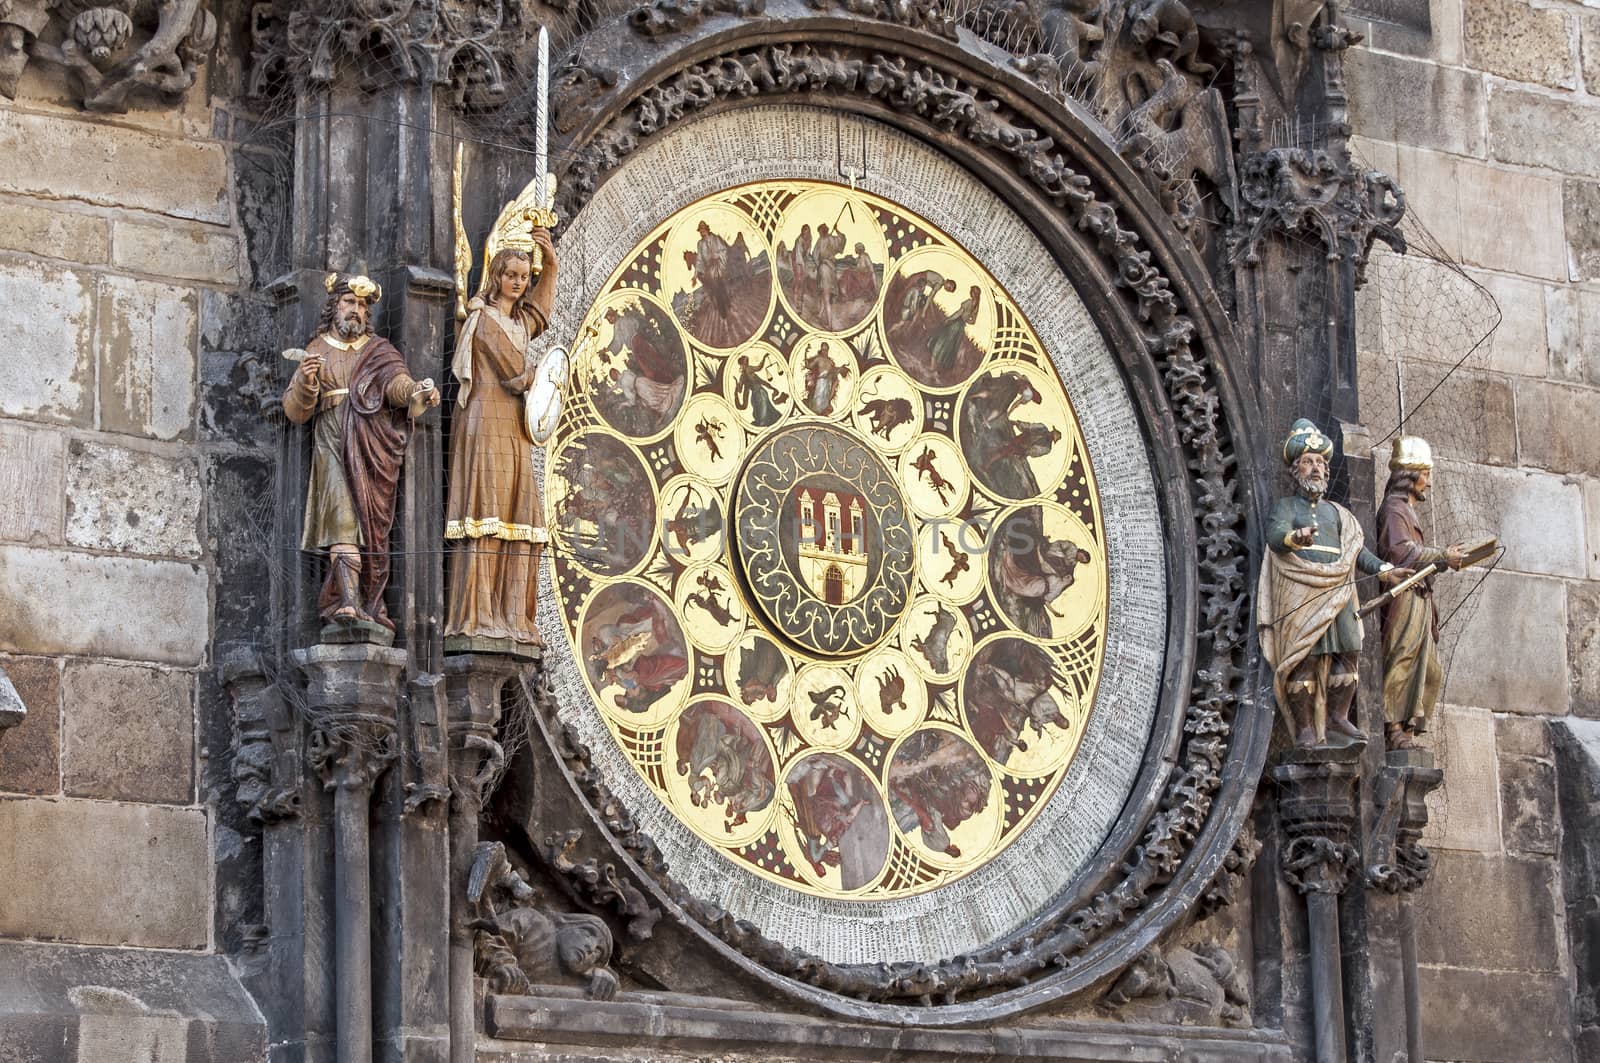 Close up view of the medieval astronomical clock of Prague, Czech Republic.